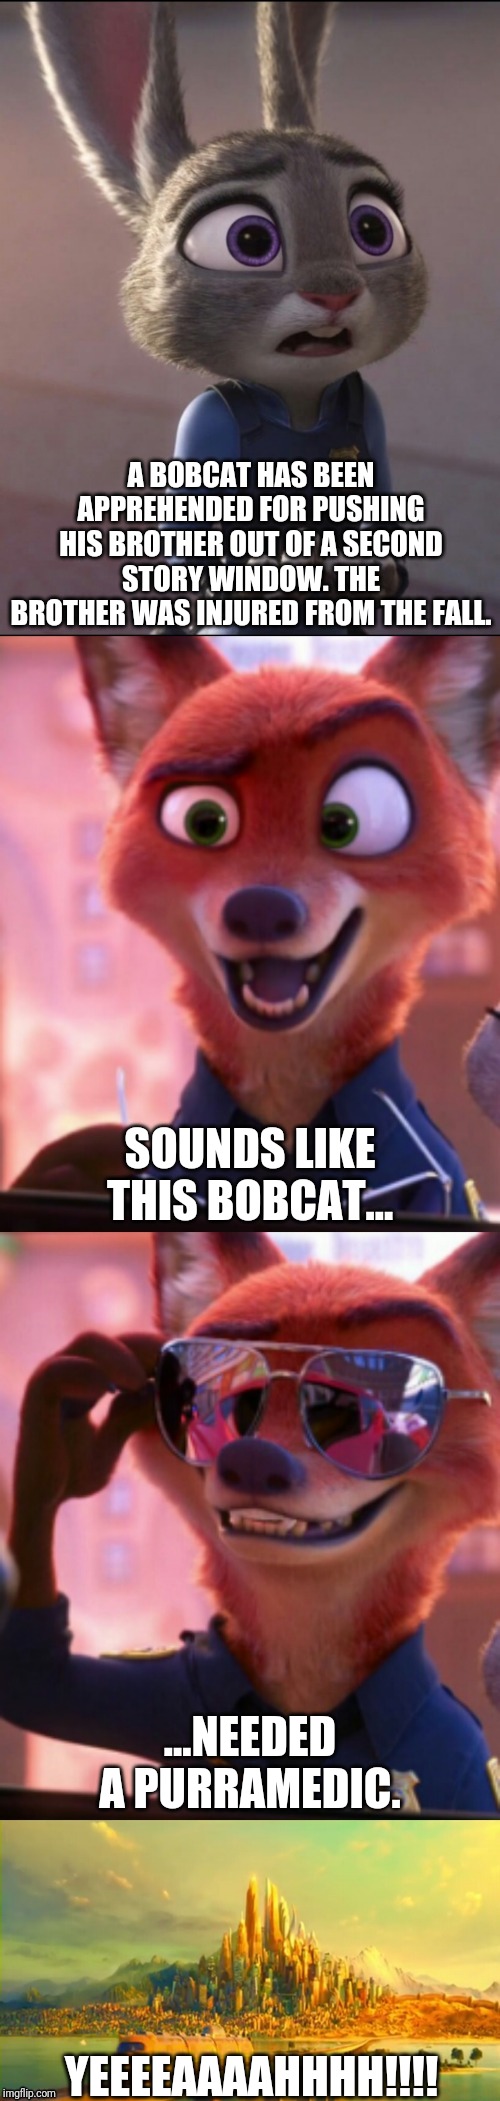 CSI: Zootopia 20 | A BOBCAT HAS BEEN APPREHENDED FOR PUSHING HIS BROTHER OUT OF A SECOND STORY WINDOW. THE BROTHER WAS INJURED FROM THE FALL. SOUNDS LIKE THIS BOBCAT... ...NEEDED A PURRAMEDIC. YEEEEAAAAHHHH!!!! | image tagged in csi zootopia,zootopia,judy hopps,nick wilde,parody,funny | made w/ Imgflip meme maker